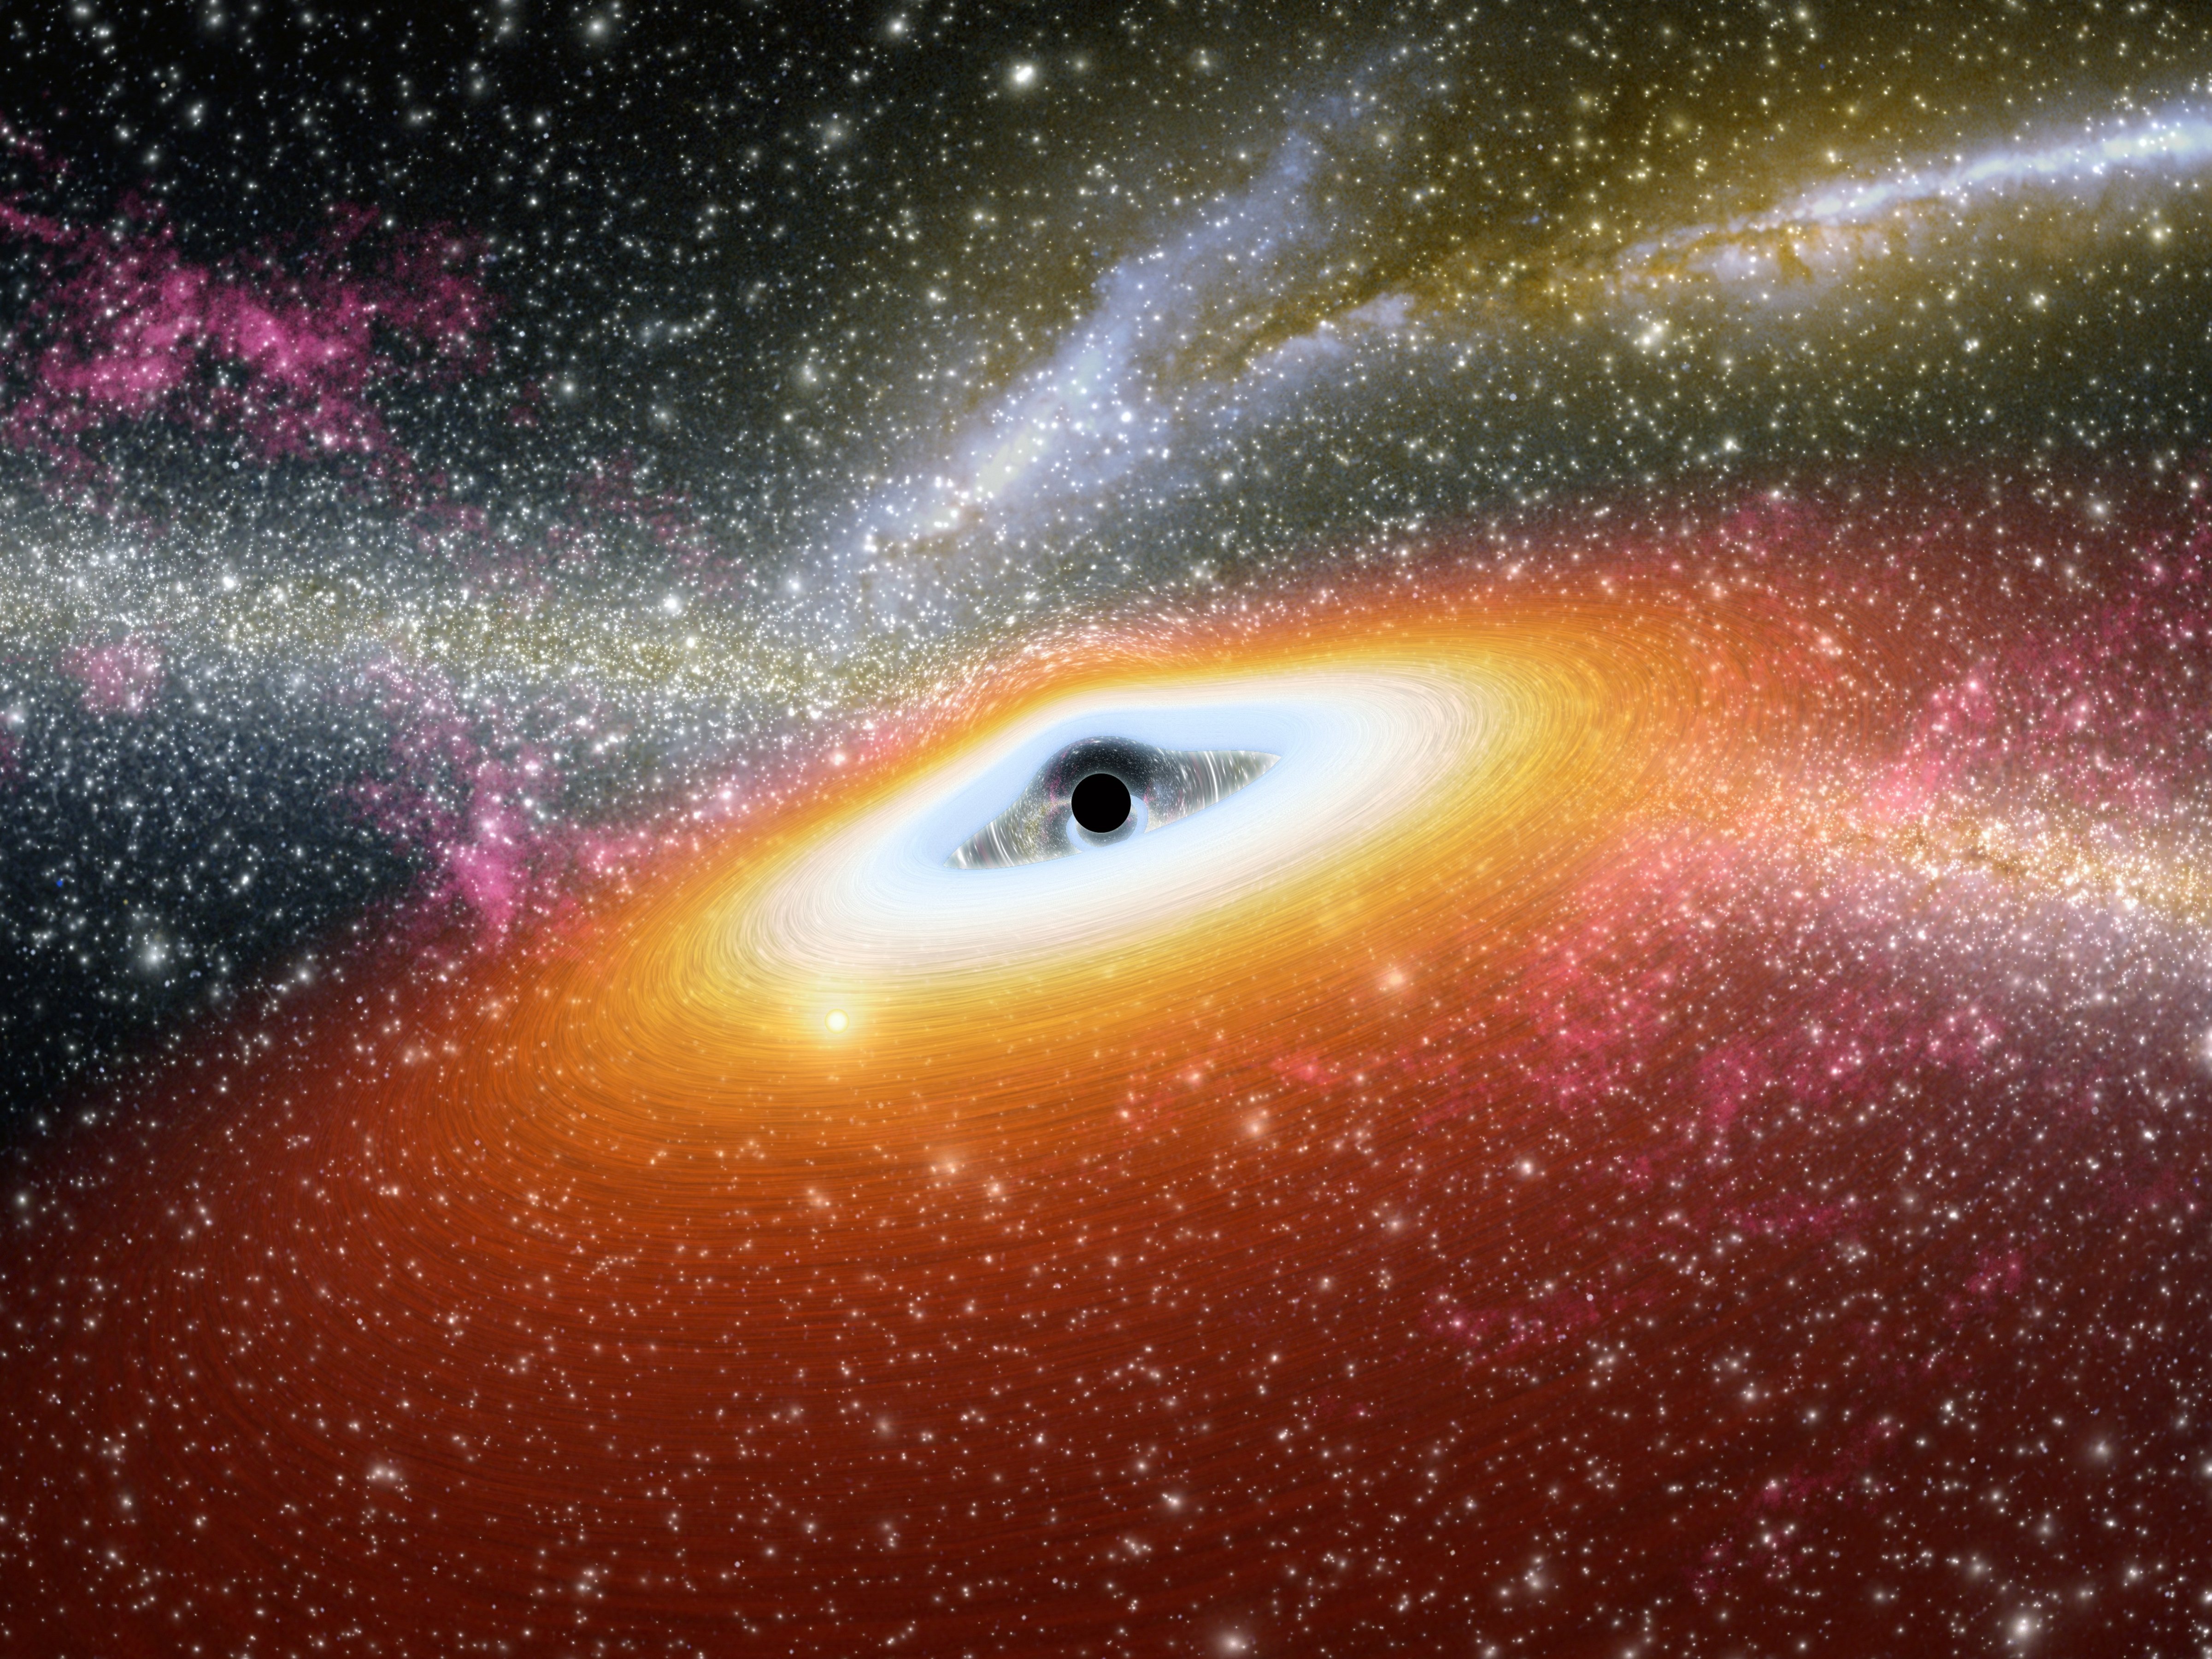 No escape: Artist's conception of a supermassive black hole at the core of a young, star-rich galaxy. (Universal History Archive; UIG via Getty Images)